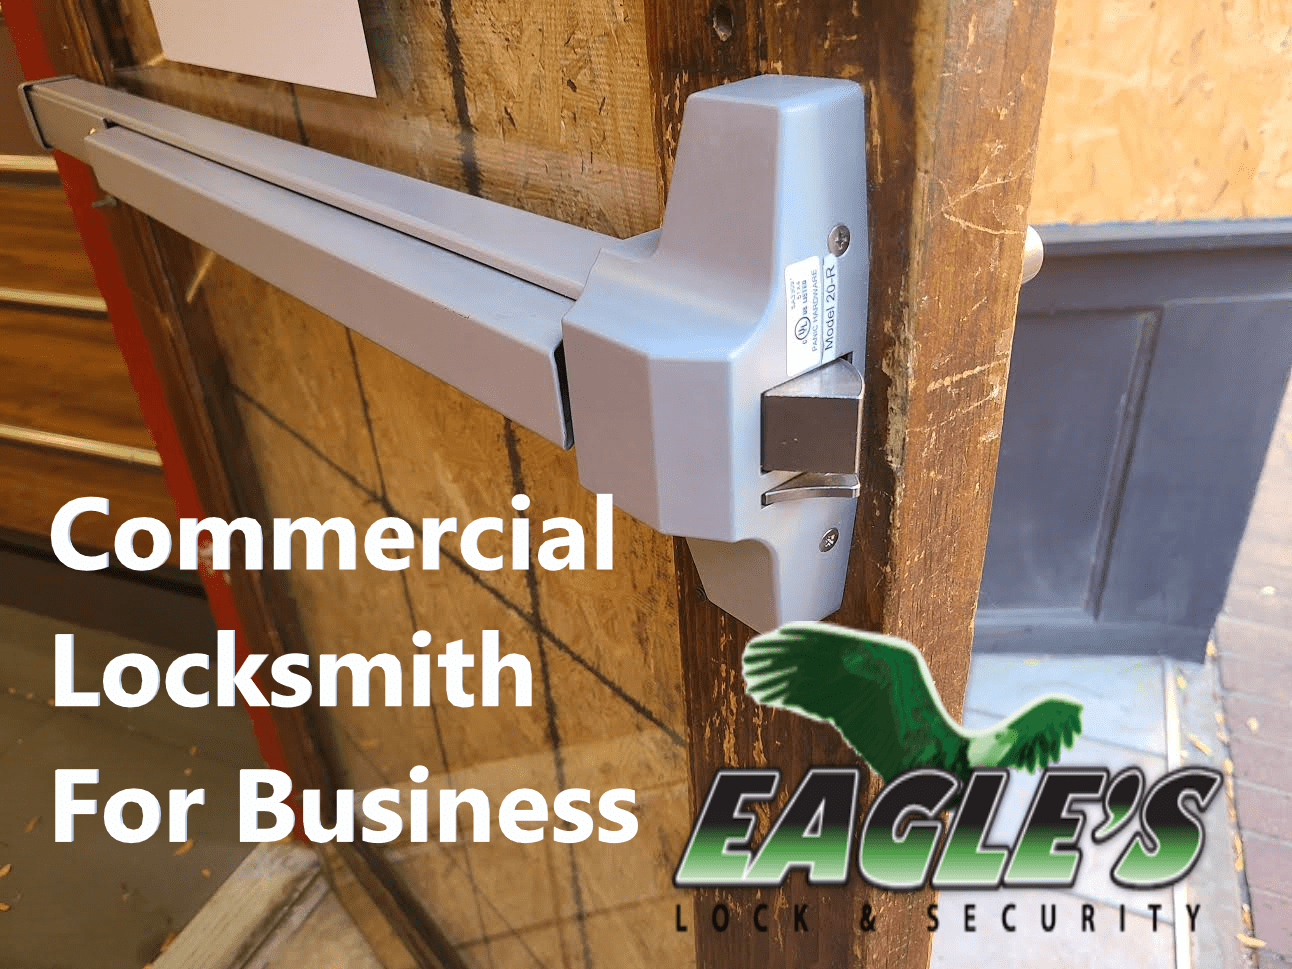 Business Commercial Locksmith Services